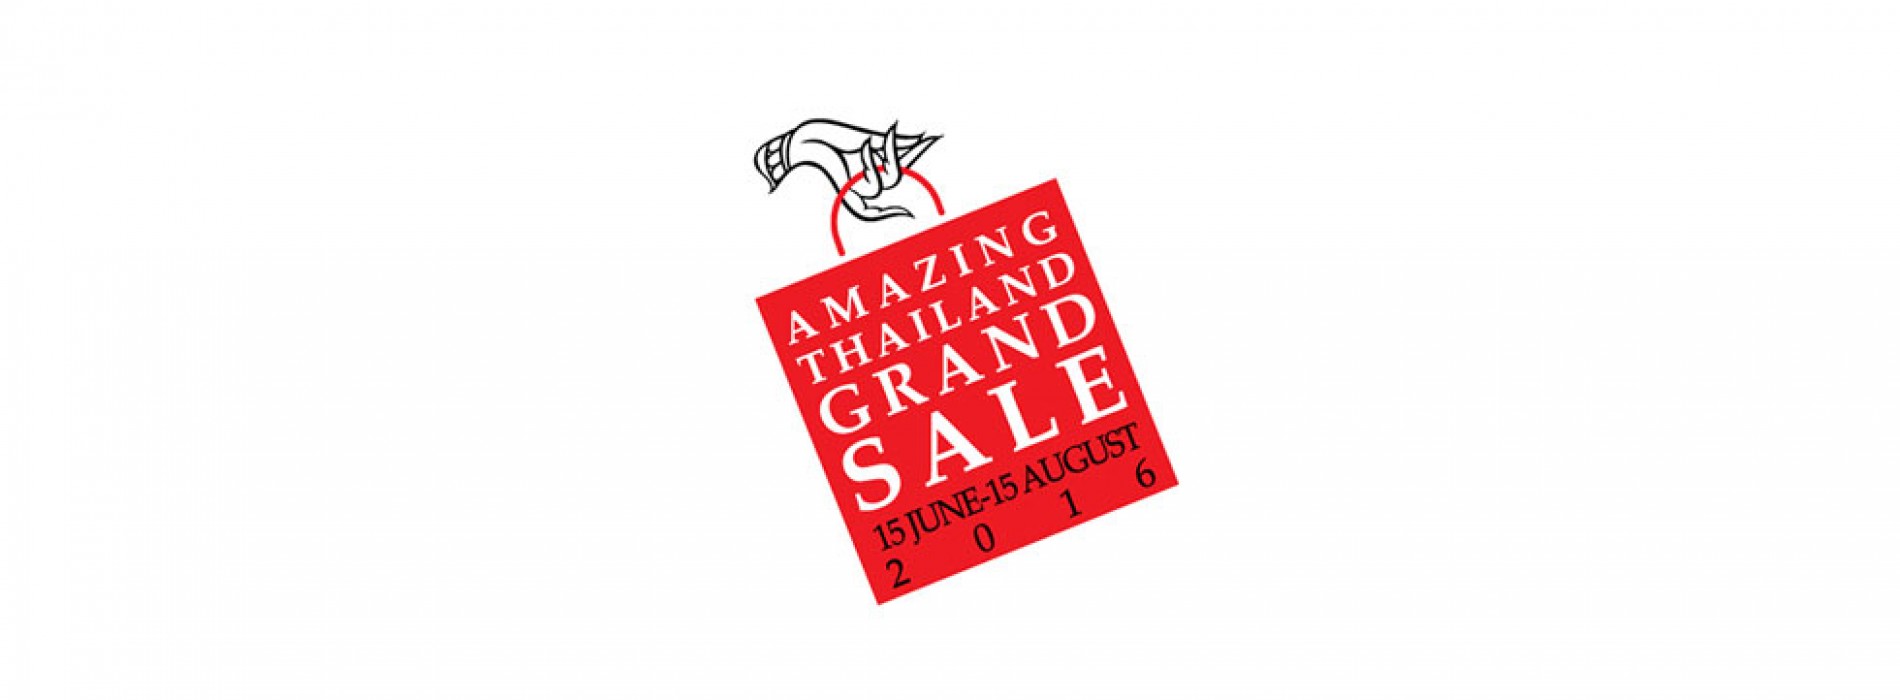 Amazing Thailand Grand Sale returns for 2016 is bigger than ever before